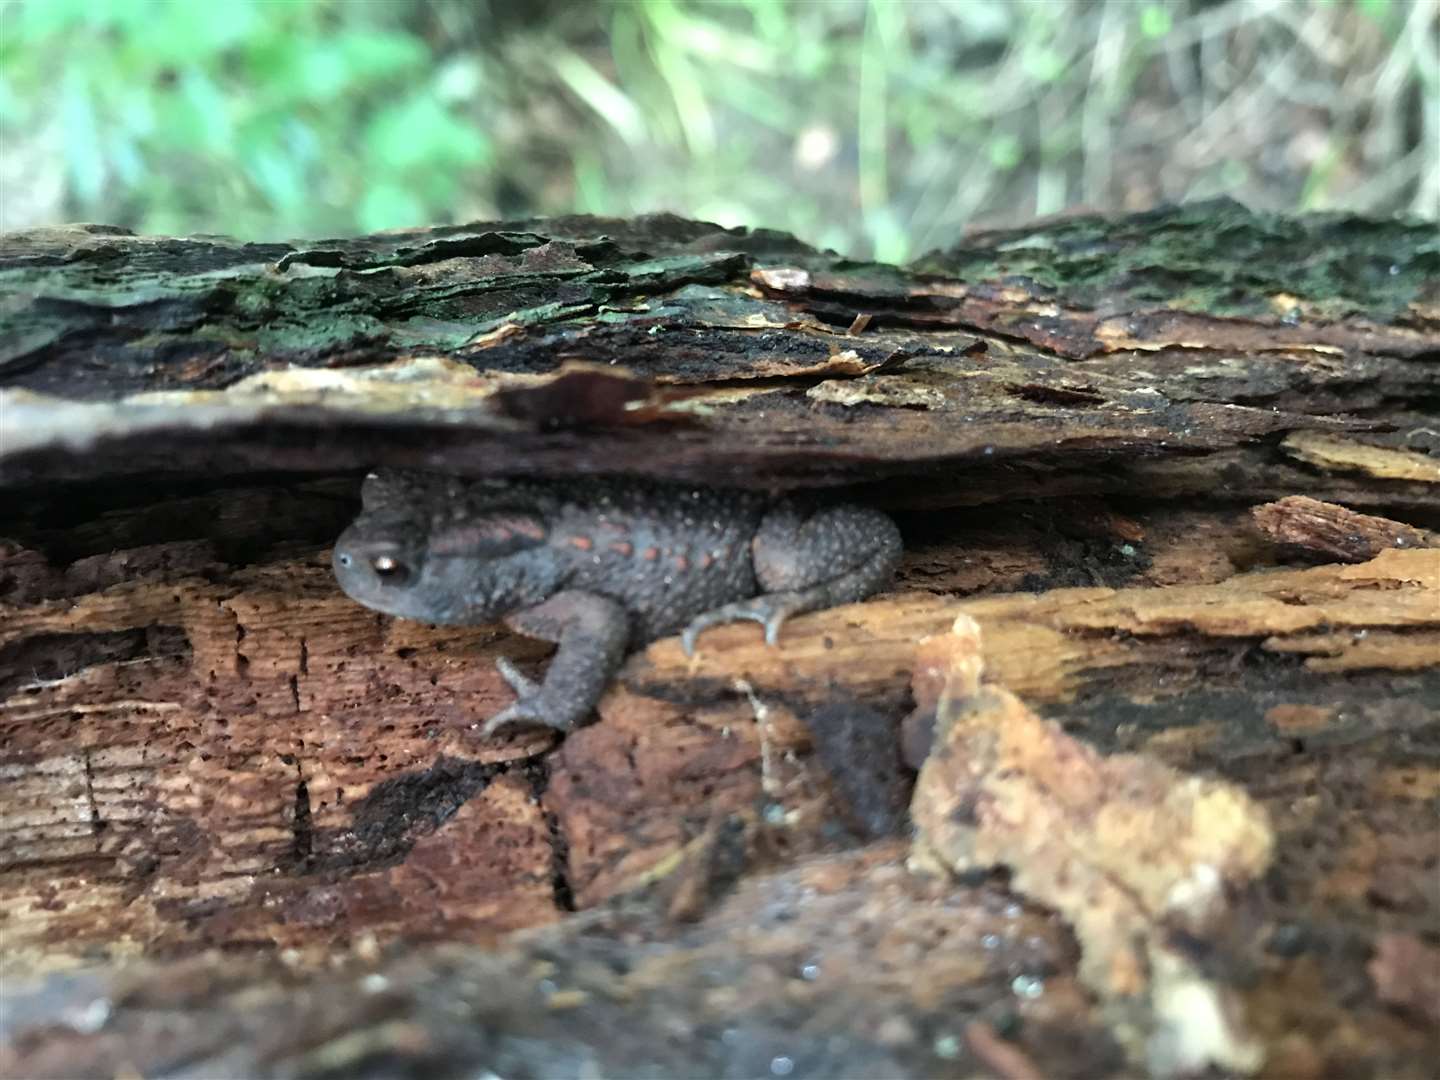 Toads were found in tree cavities (Froglife/PA)